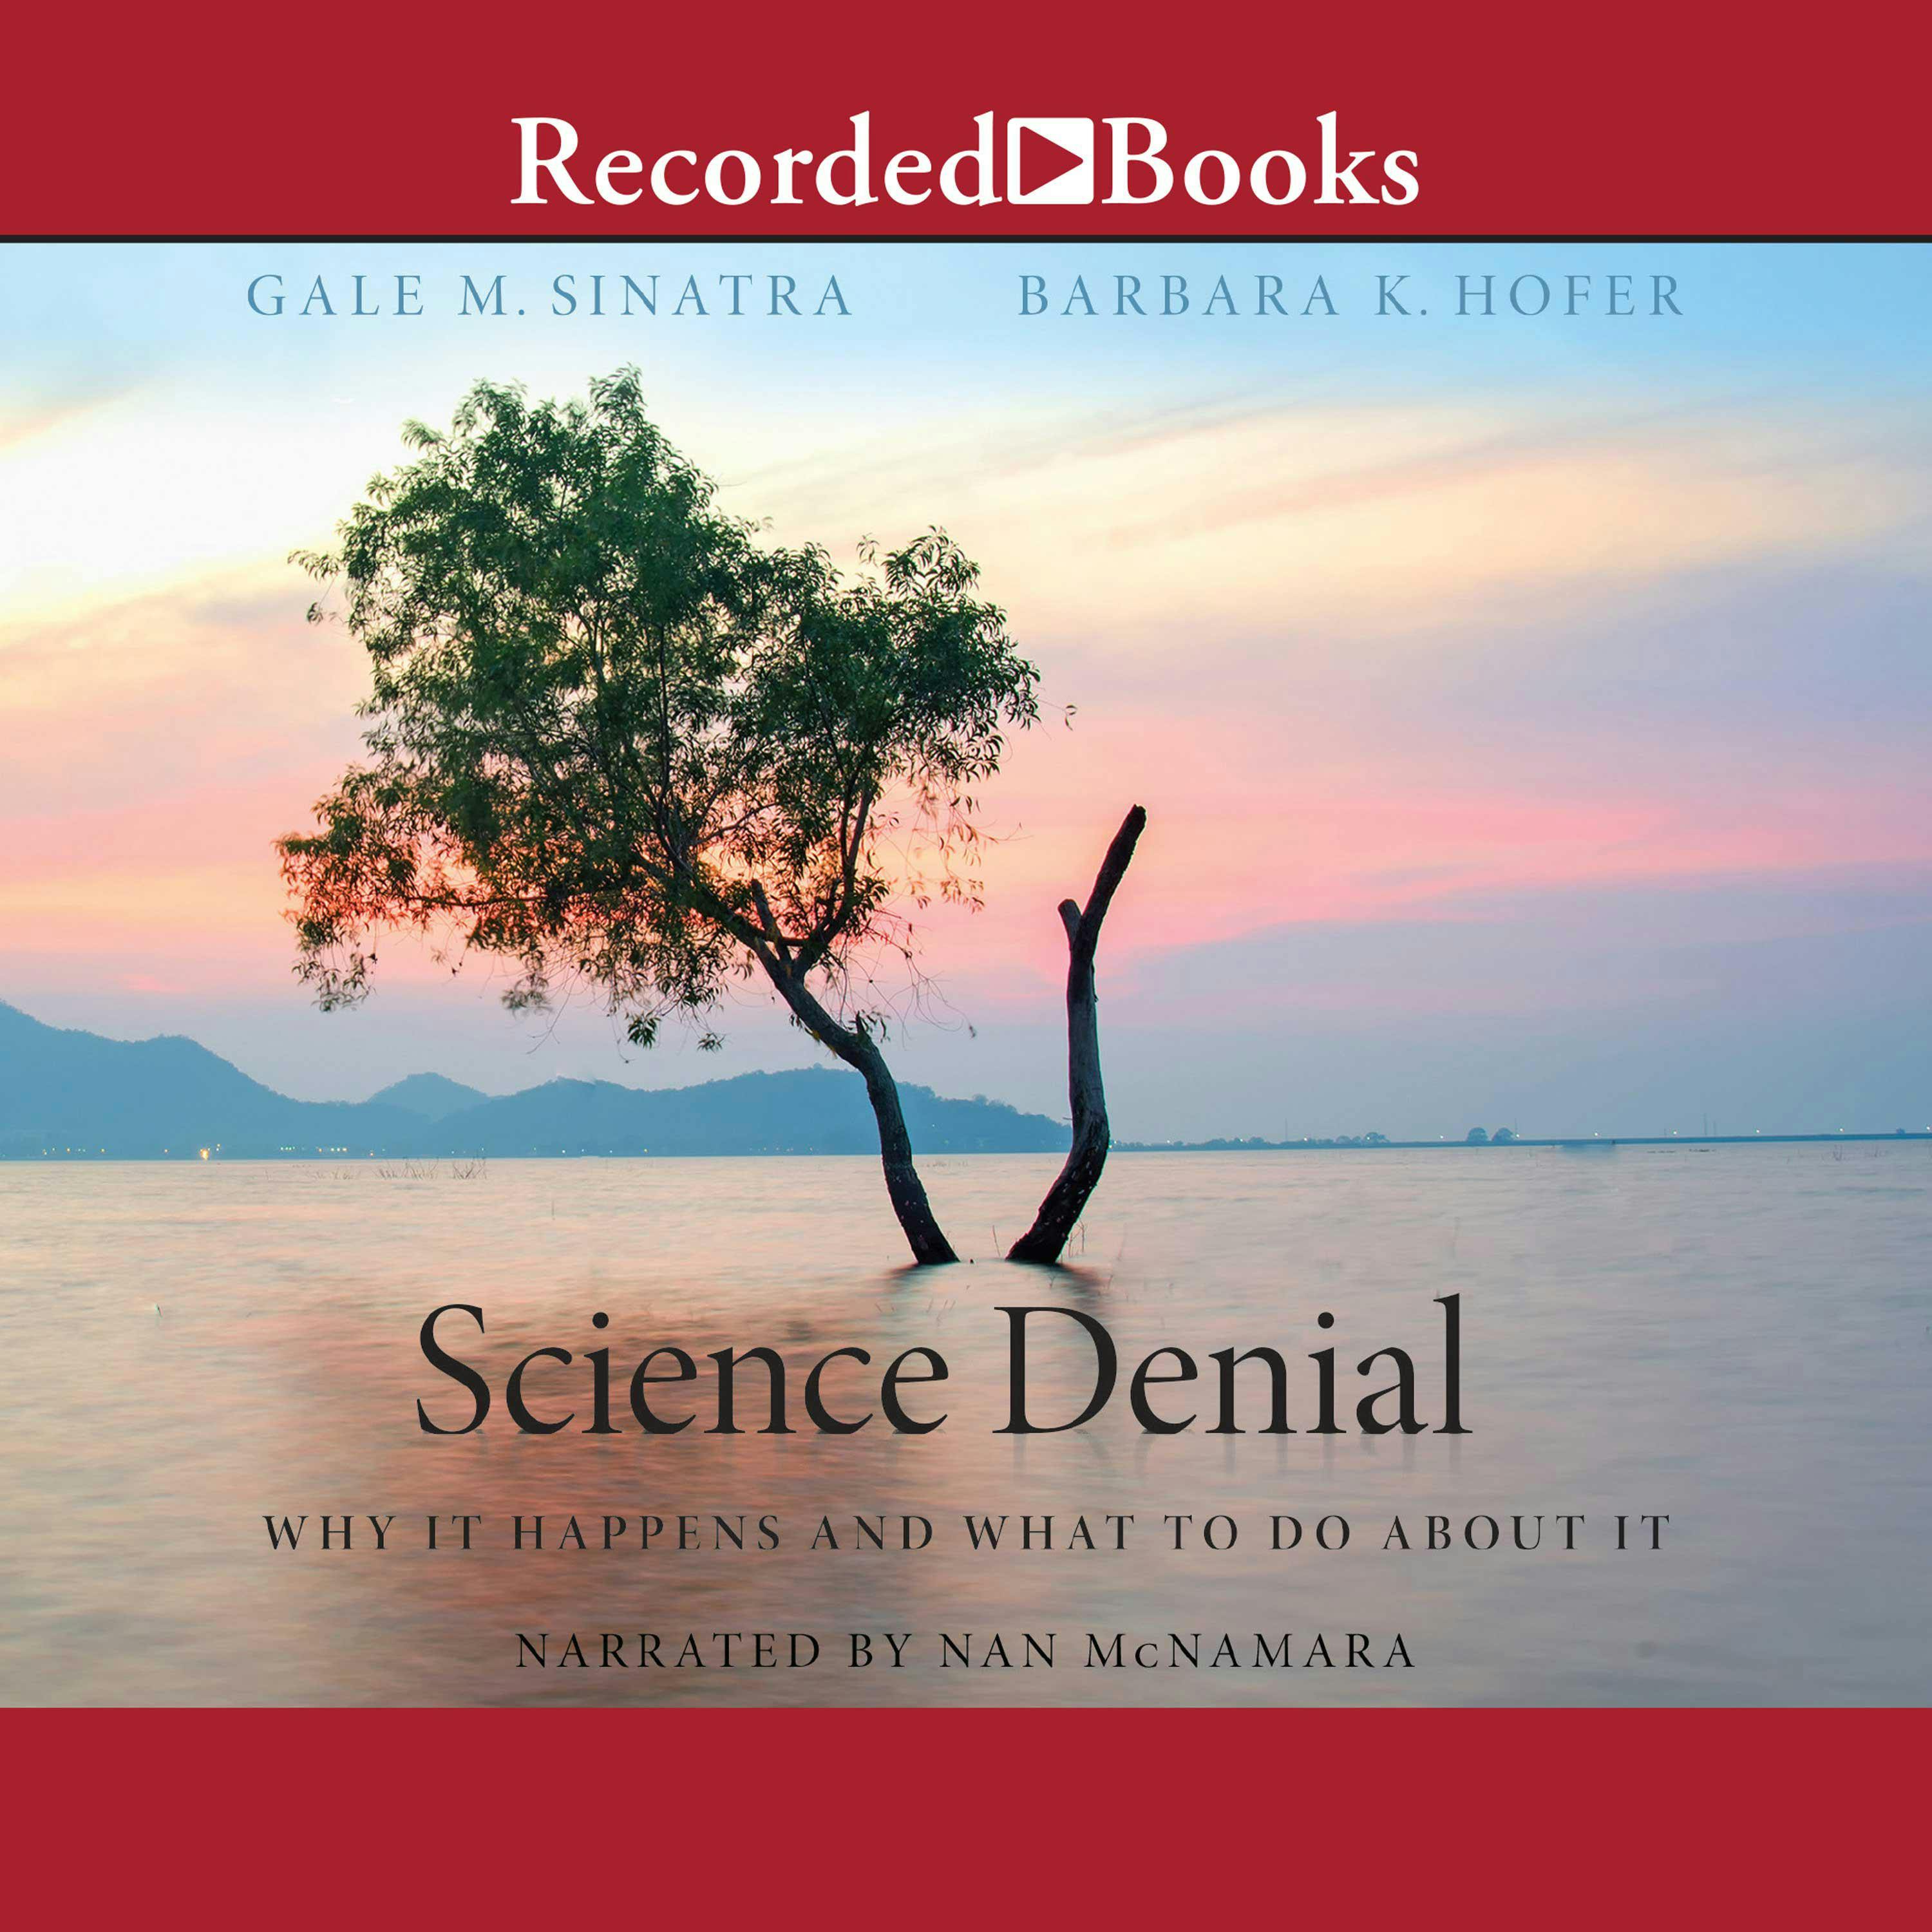 Science Denial: Why It Happens and What to Do About It - Gale Sinatra, Barbara Hofer